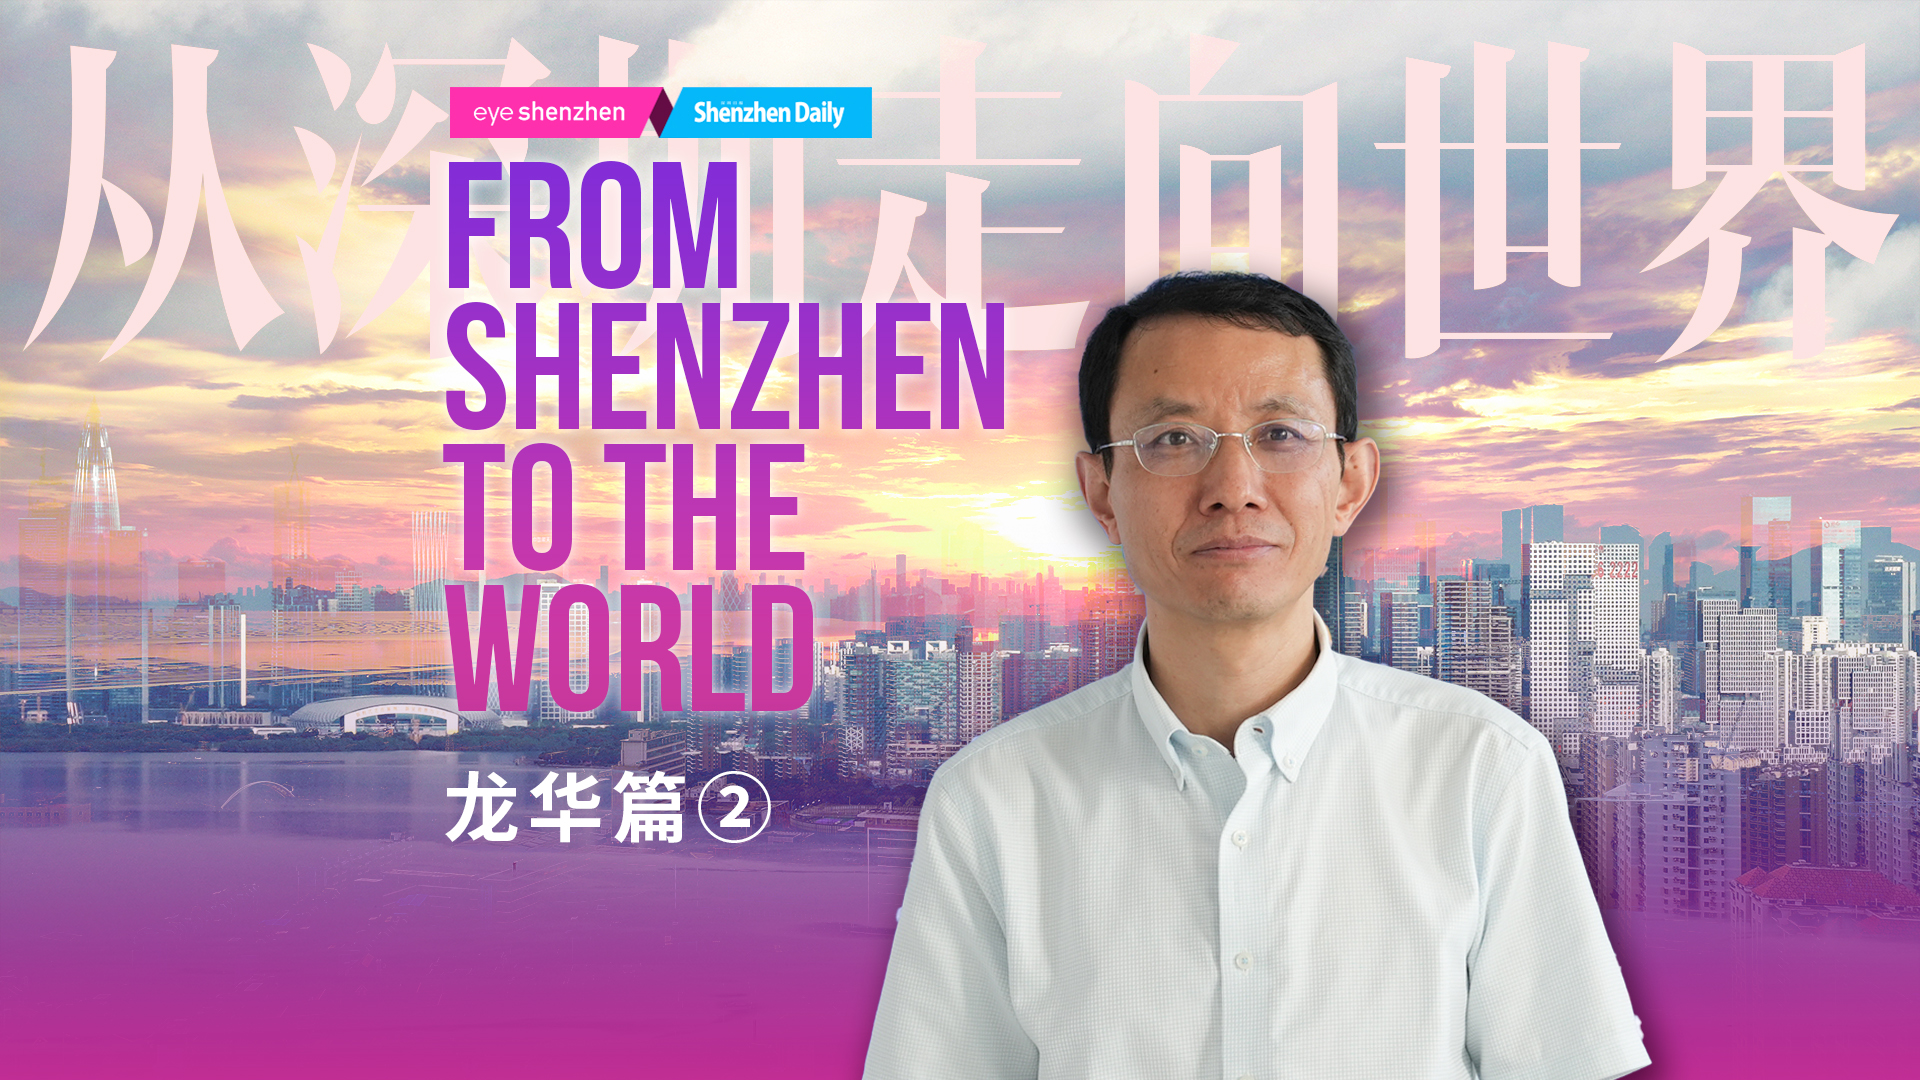 From Longhua to the World: Shenzhen Neoway Technology Co. Ltd.,longhua,longhua district,Longhua Government Online